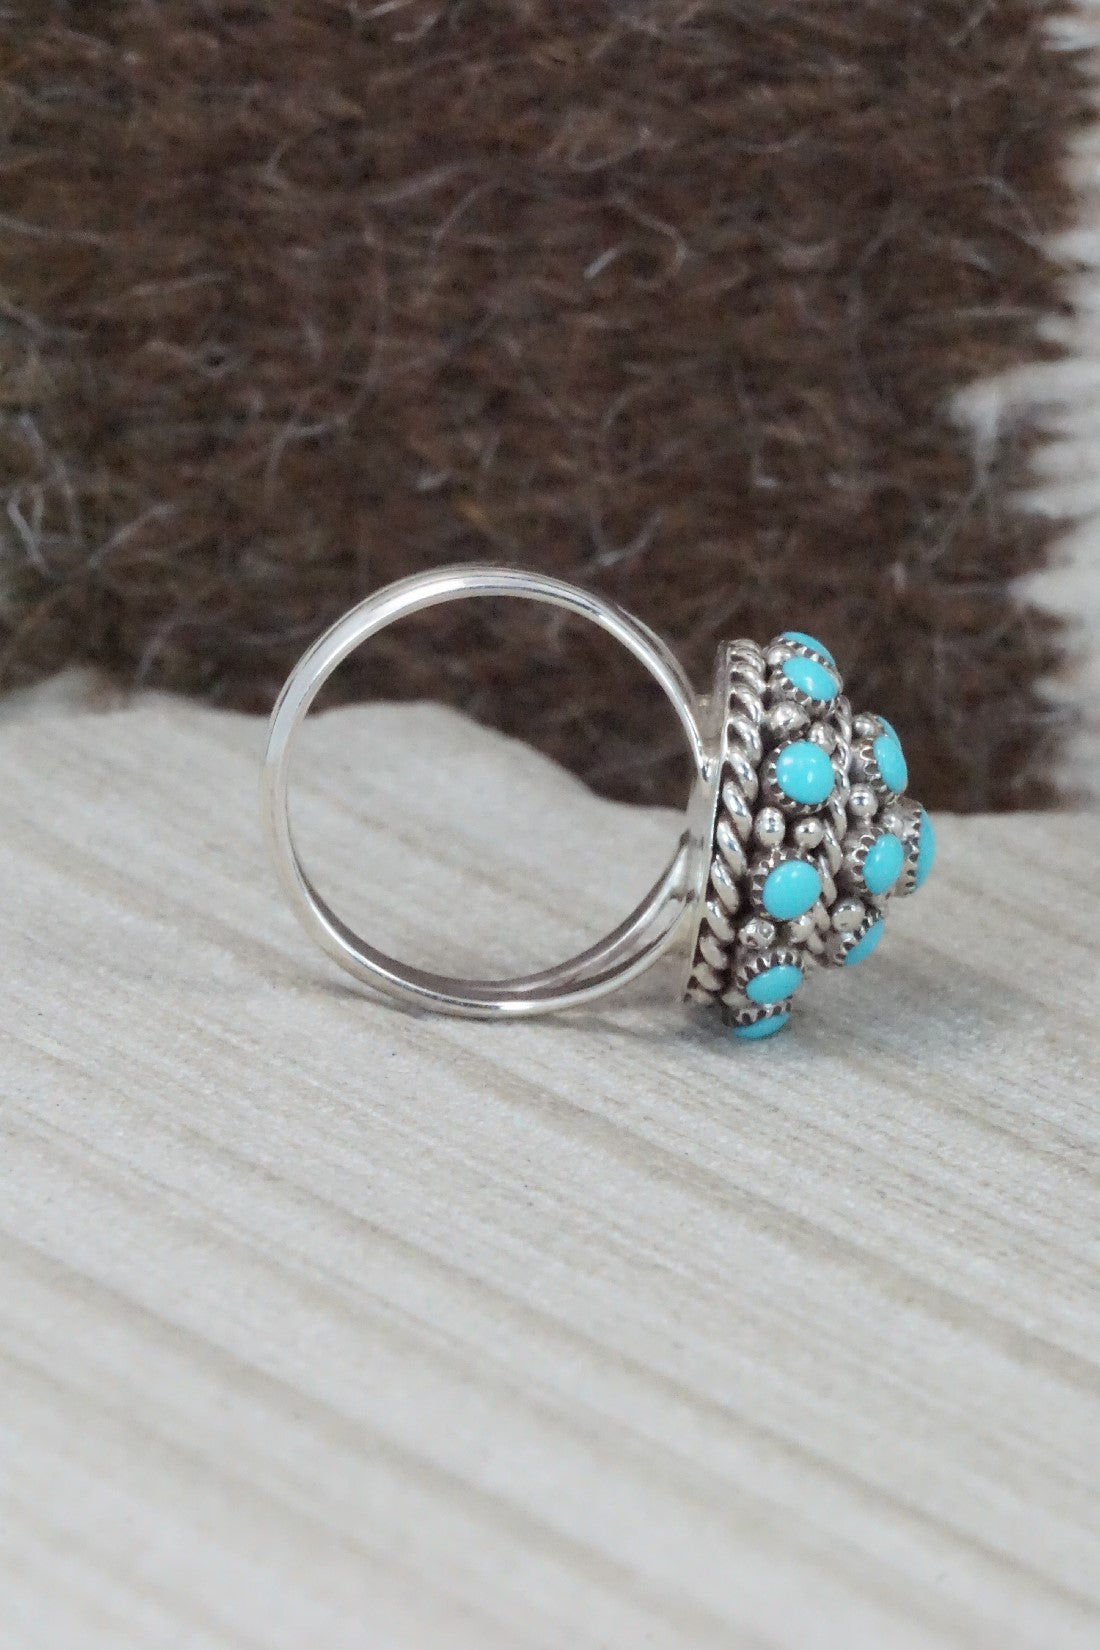 Turquoise & Sterling Silver Ring - Dickie Charlie - Size 6.5